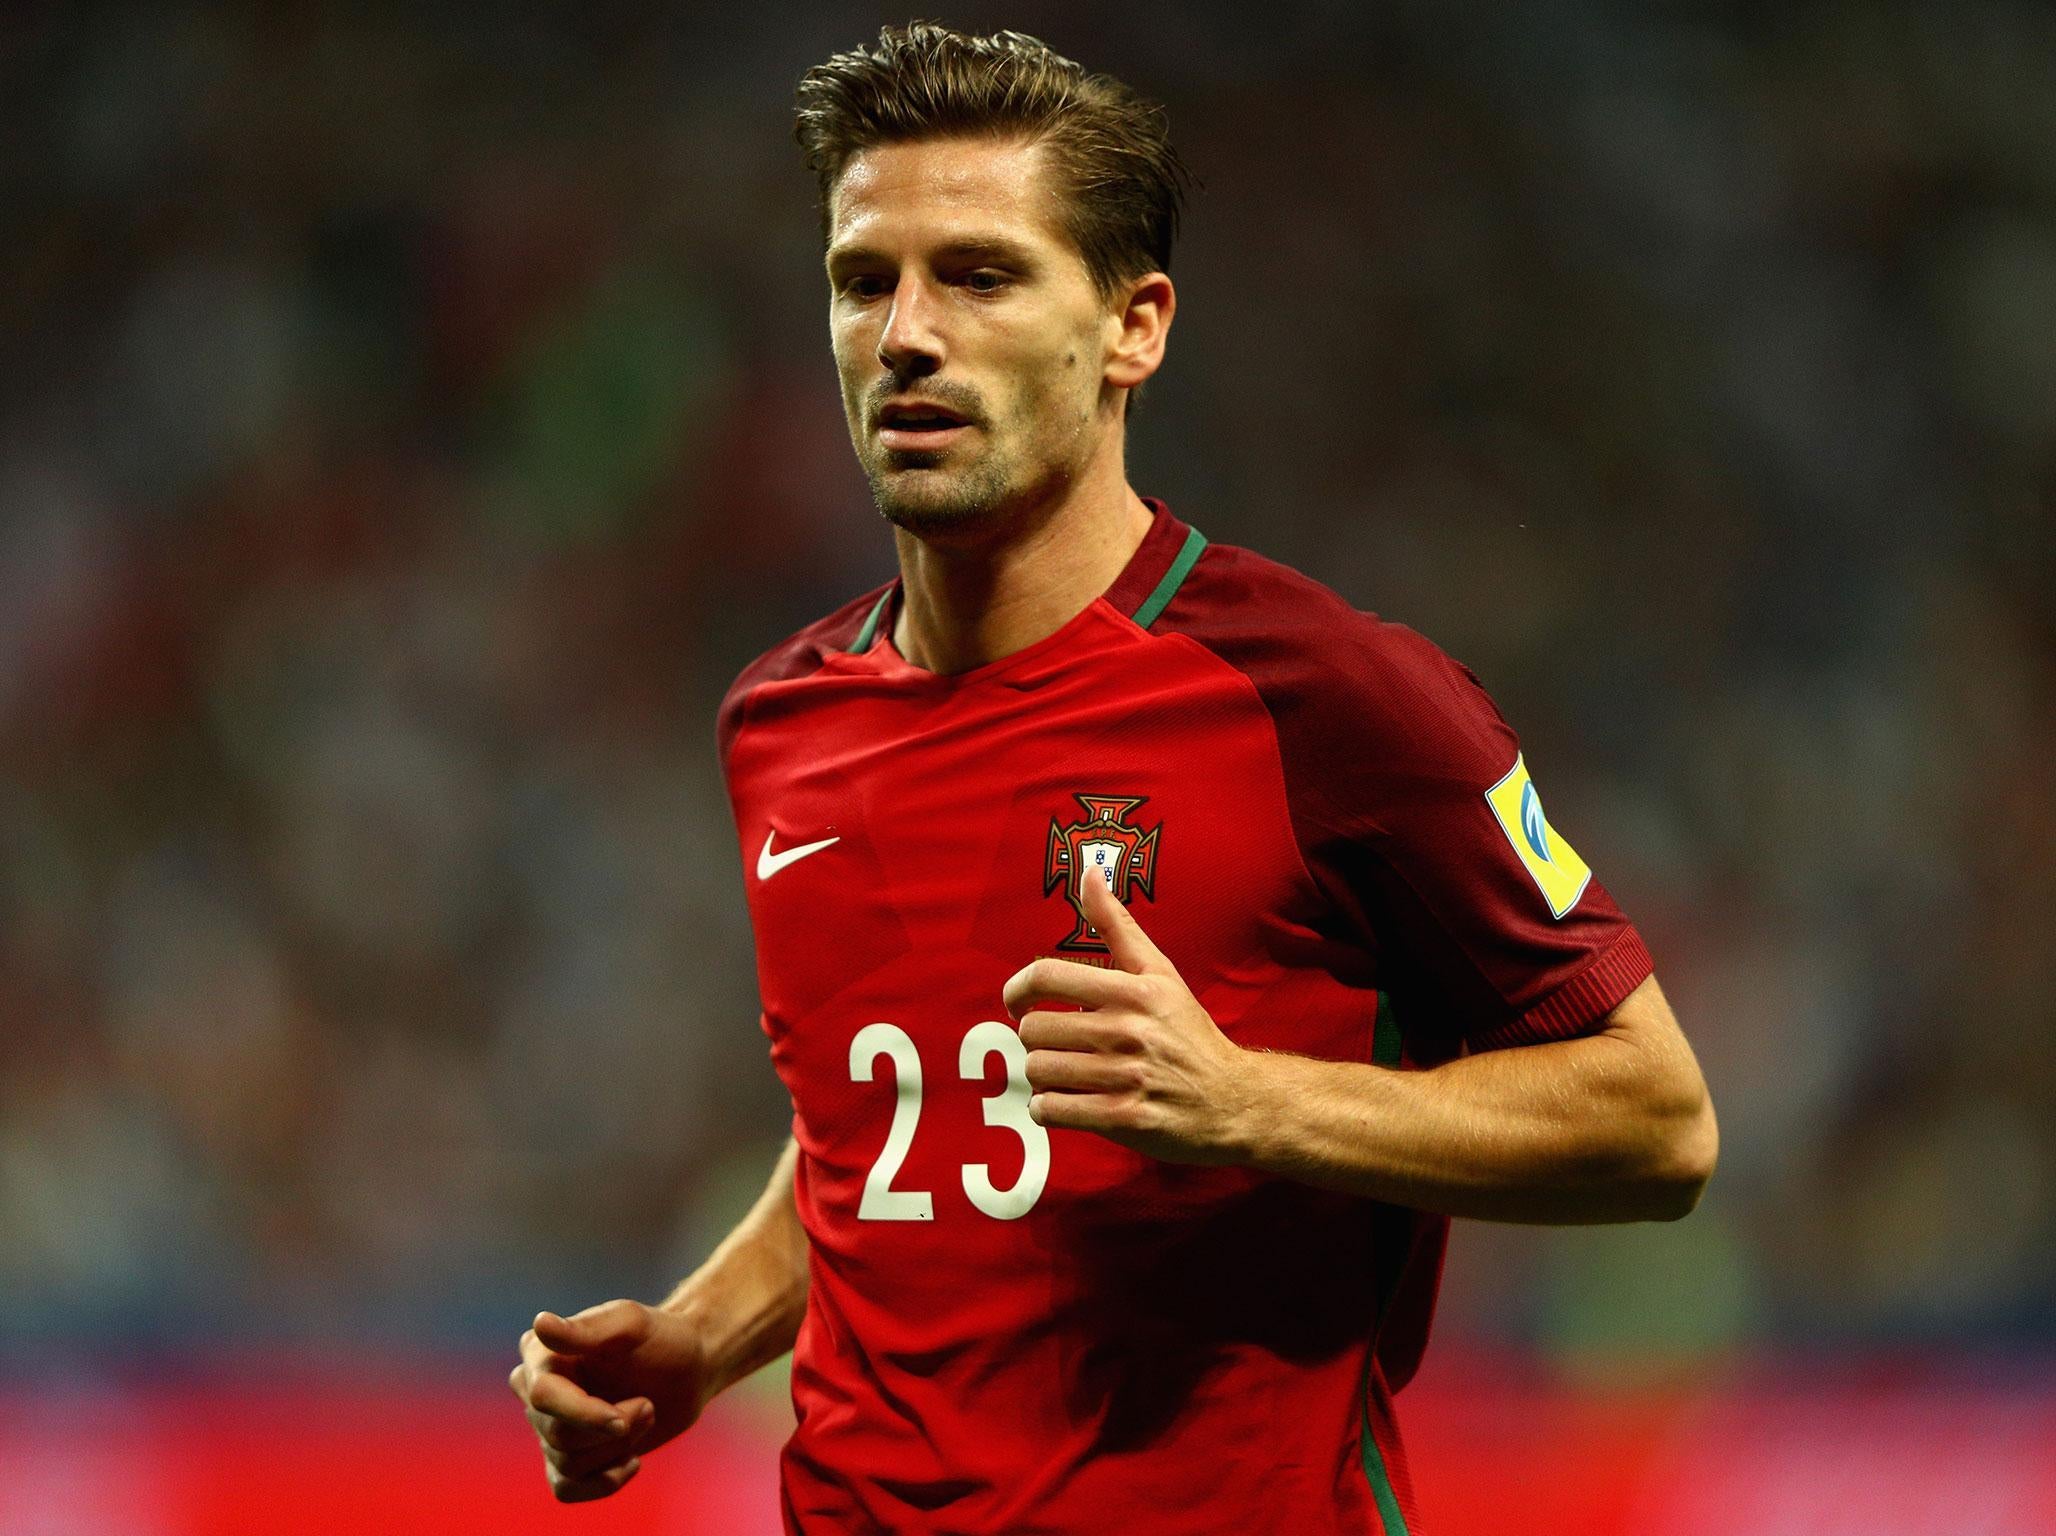 Leicester missed the deadline to sign Adrien Silva by just 14 seconds